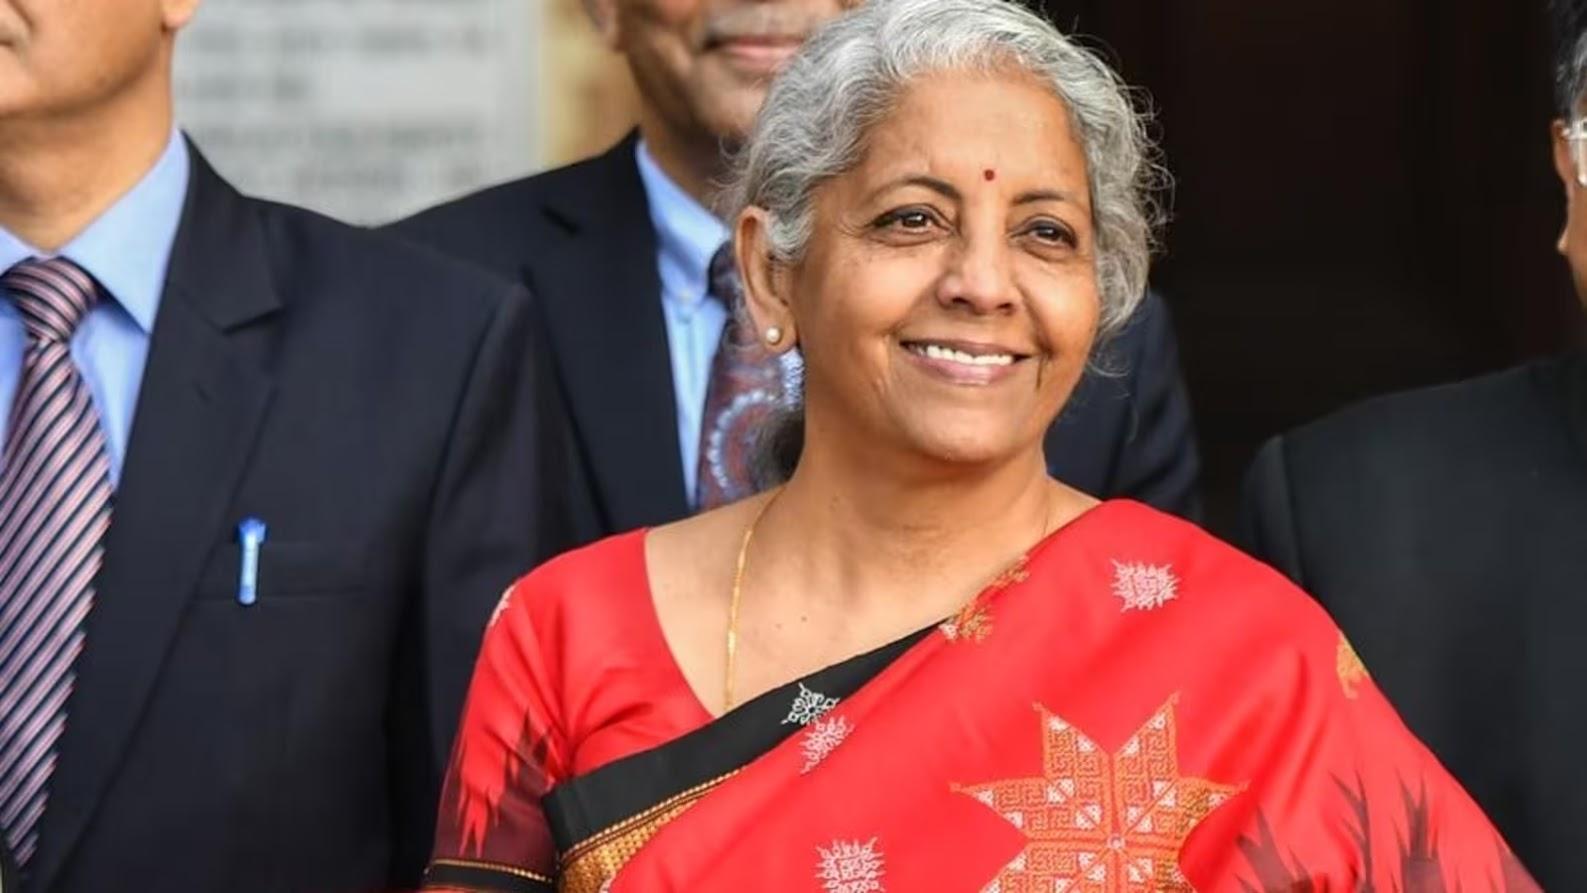 India To become World's Third-Largest Economy By 2027: FM Nirmala Sitharaman